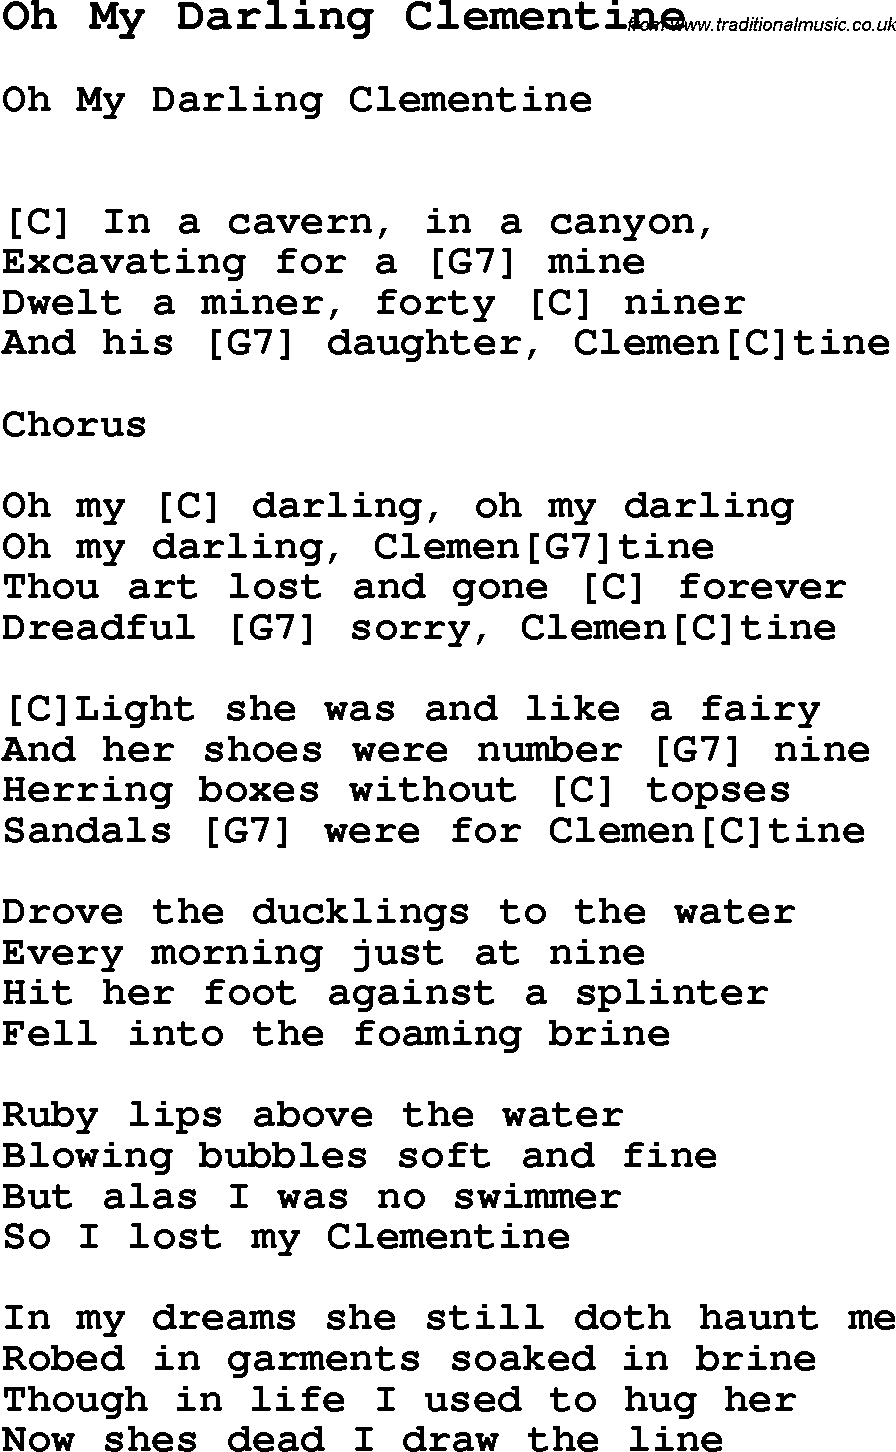 Song Oh My Clementine, song lyric for vocal performance plus accompaniment chords for Ukulele, Guitar, Banjo etc.